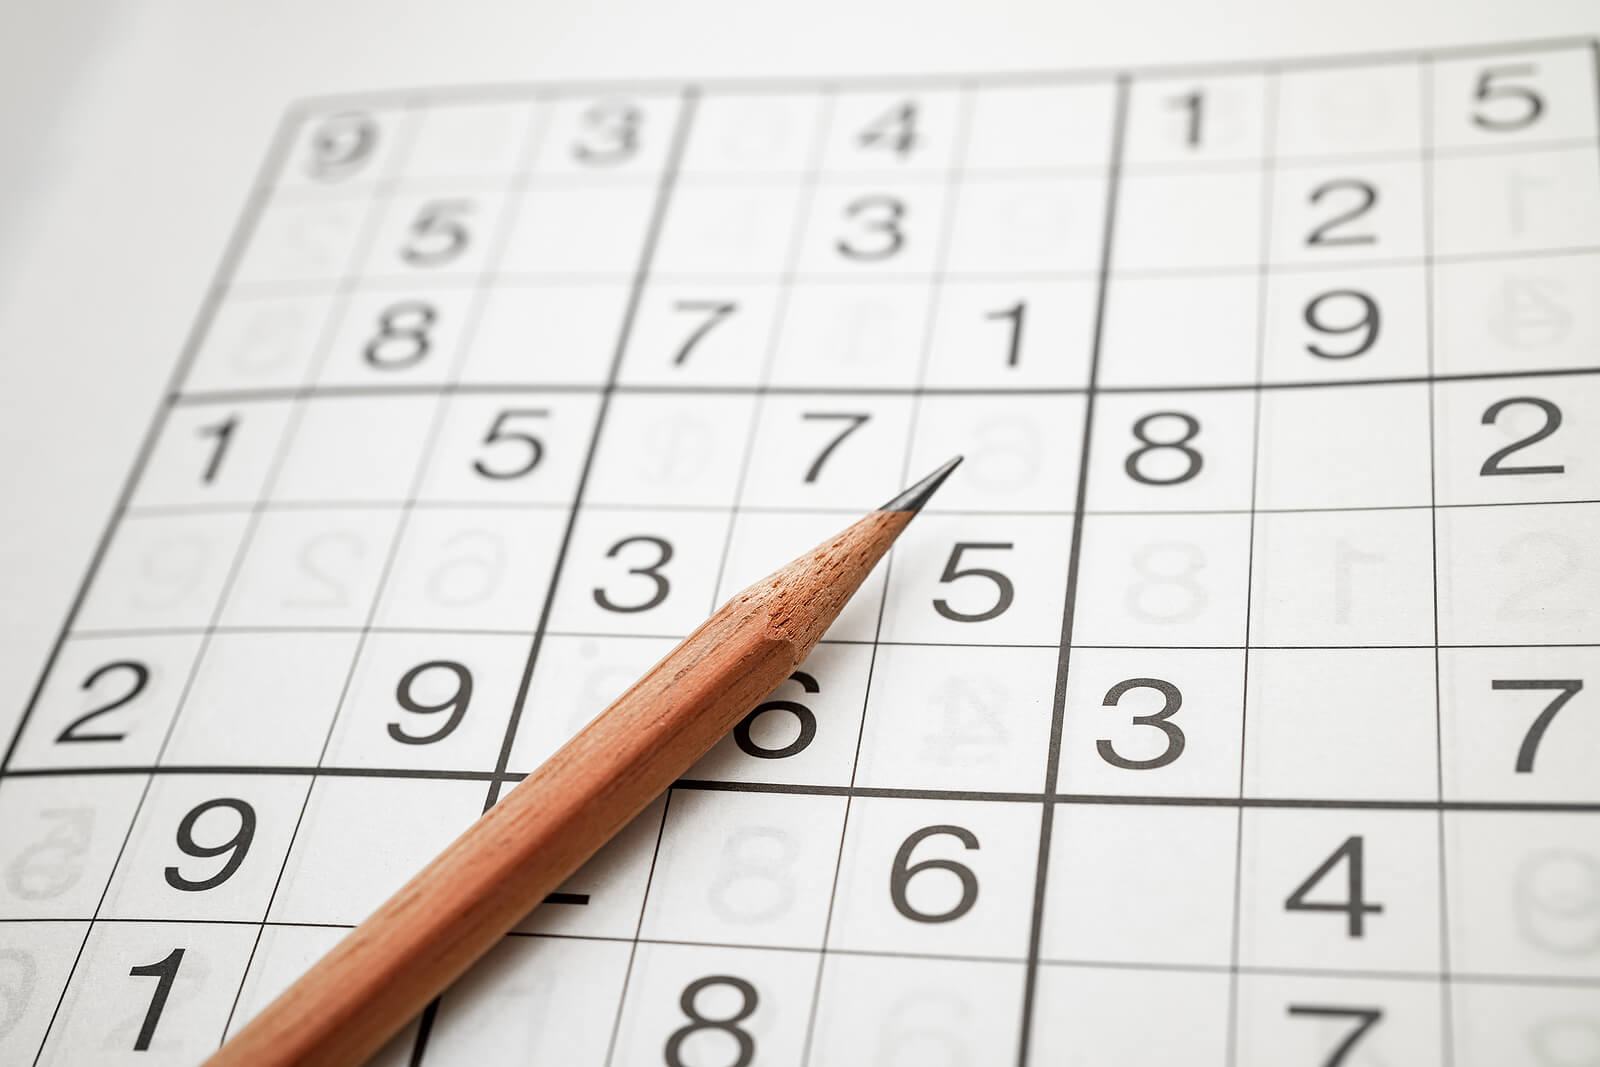 5 Ways to Solve a Sudoku - wikiHow